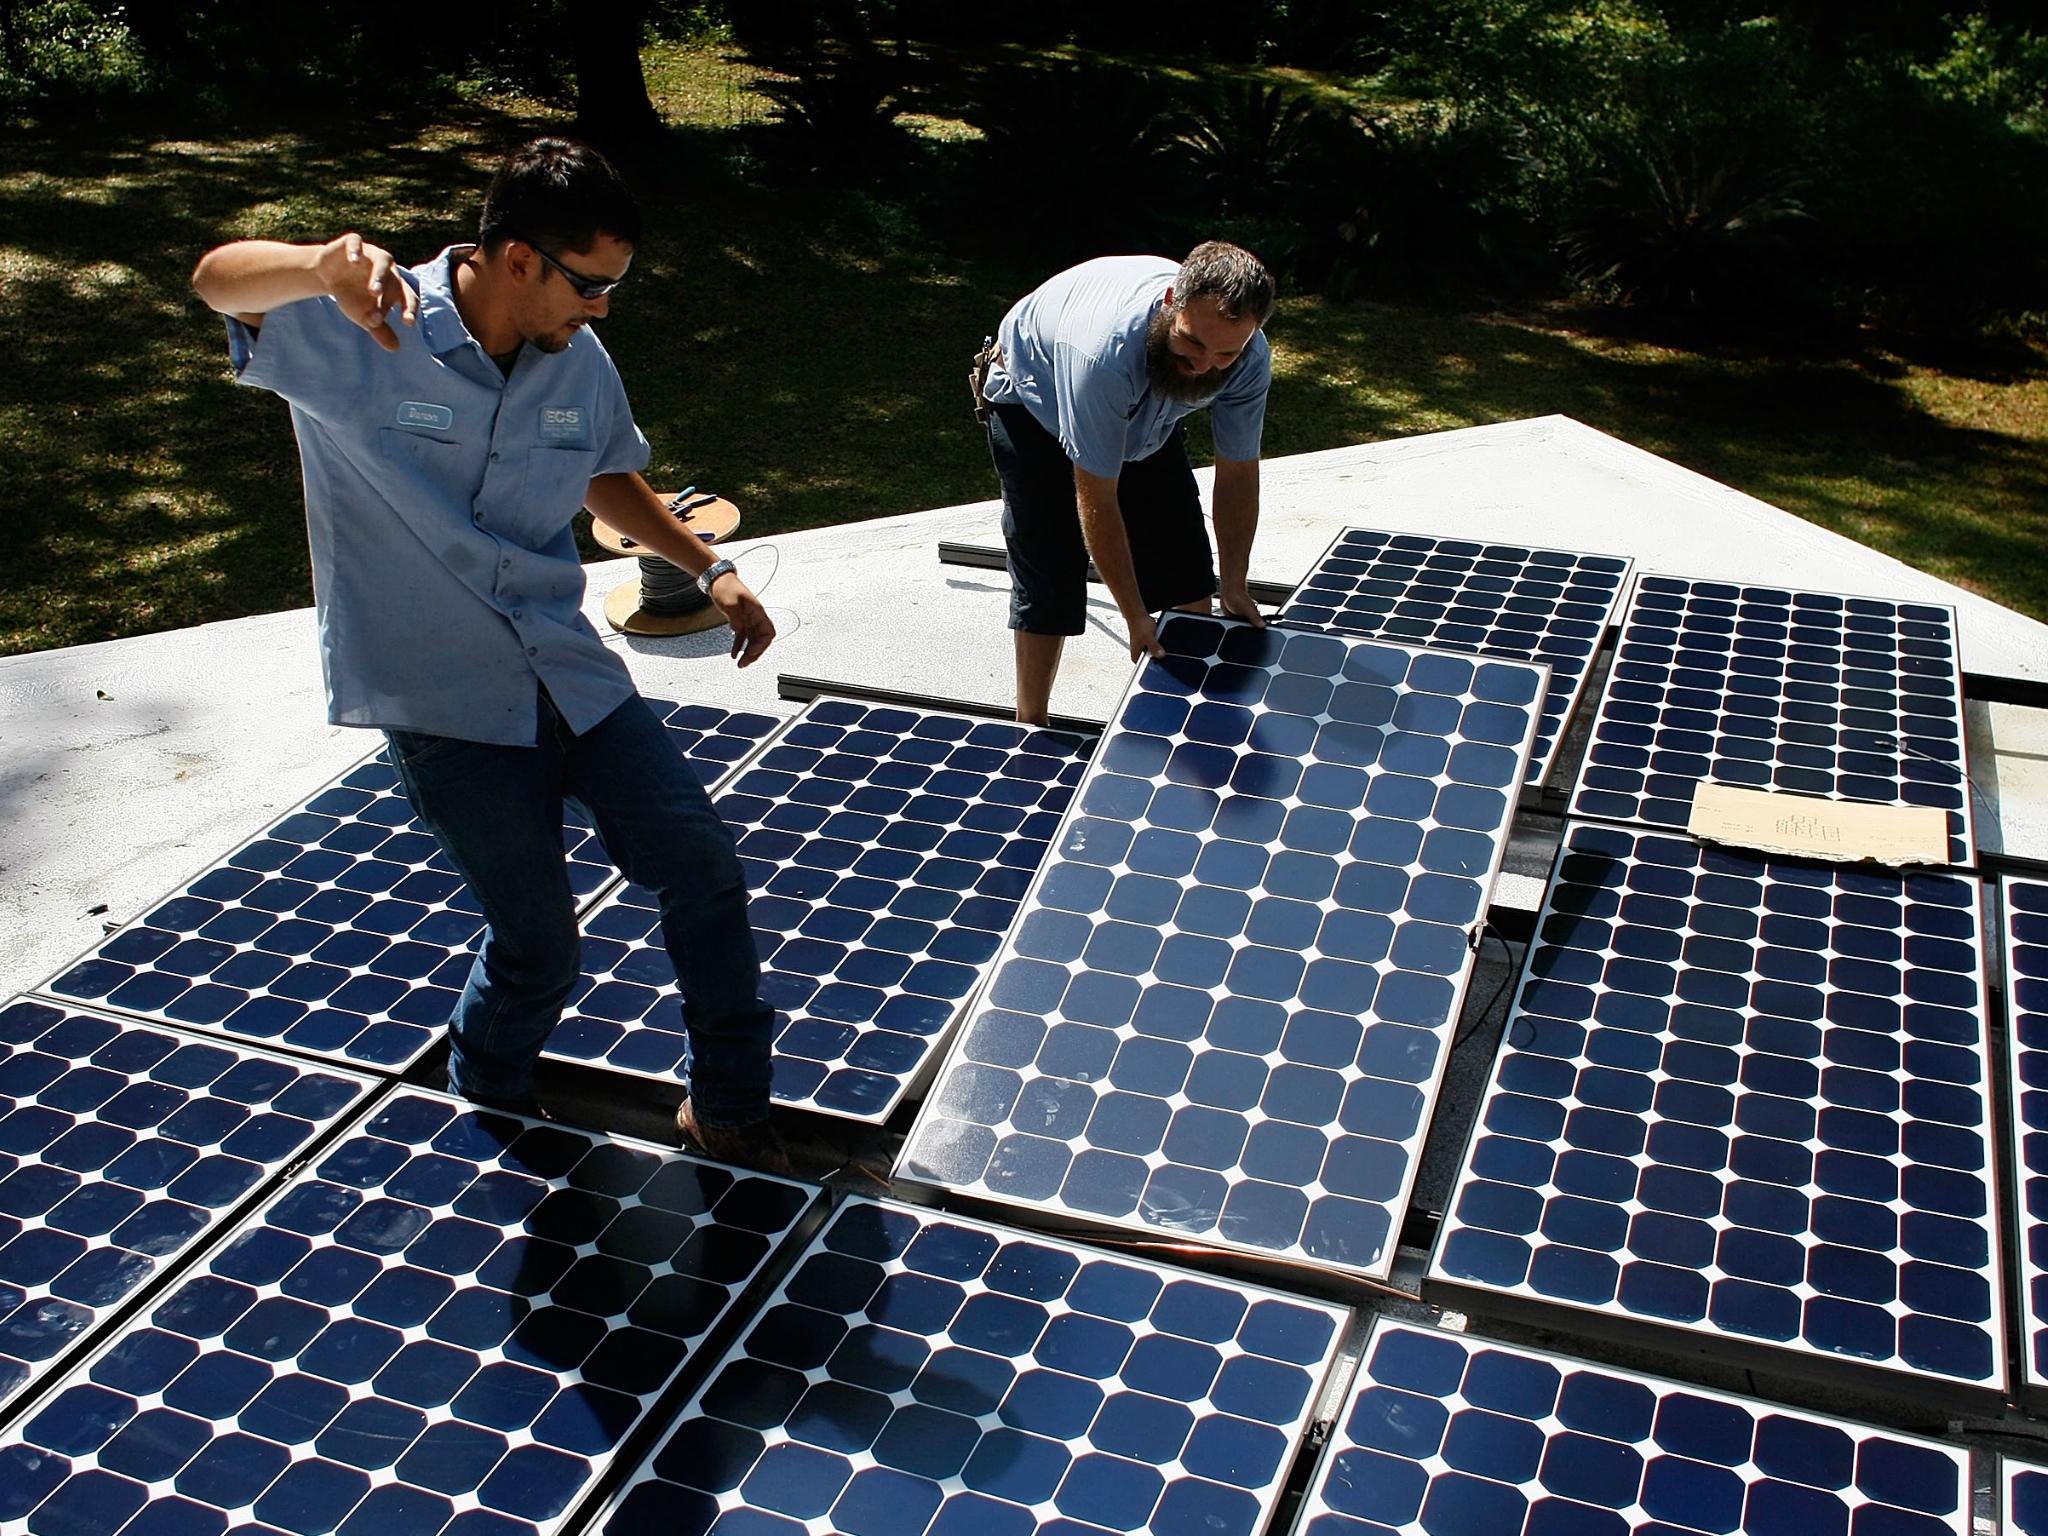 Workers install a solar panel system on the roof of a home in Gainesville, Florida.